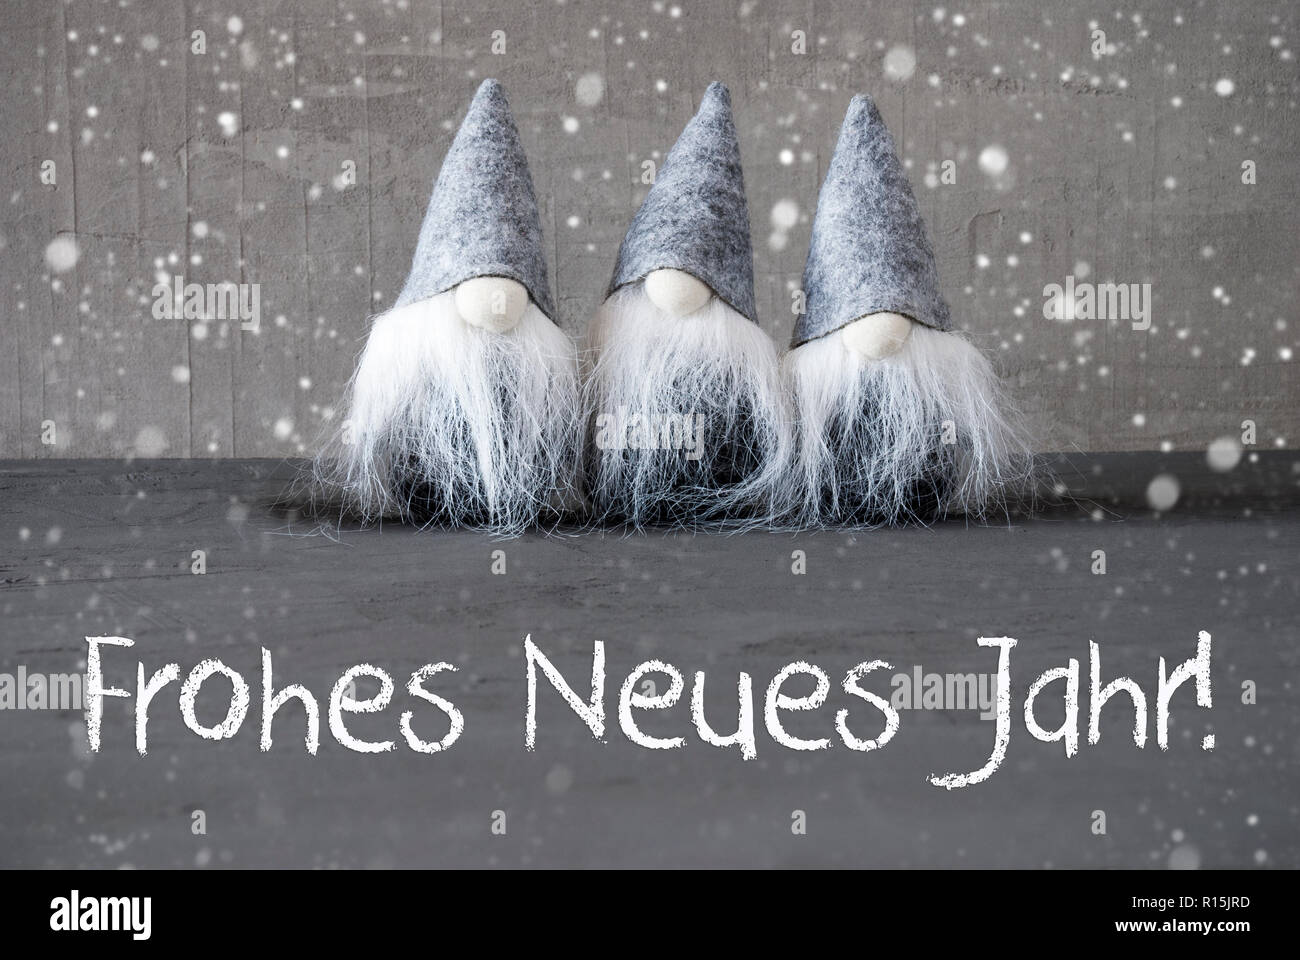 Gnomes, Snowflakes, Frohes Neues Jahr Means Happy New Year Stock Photo